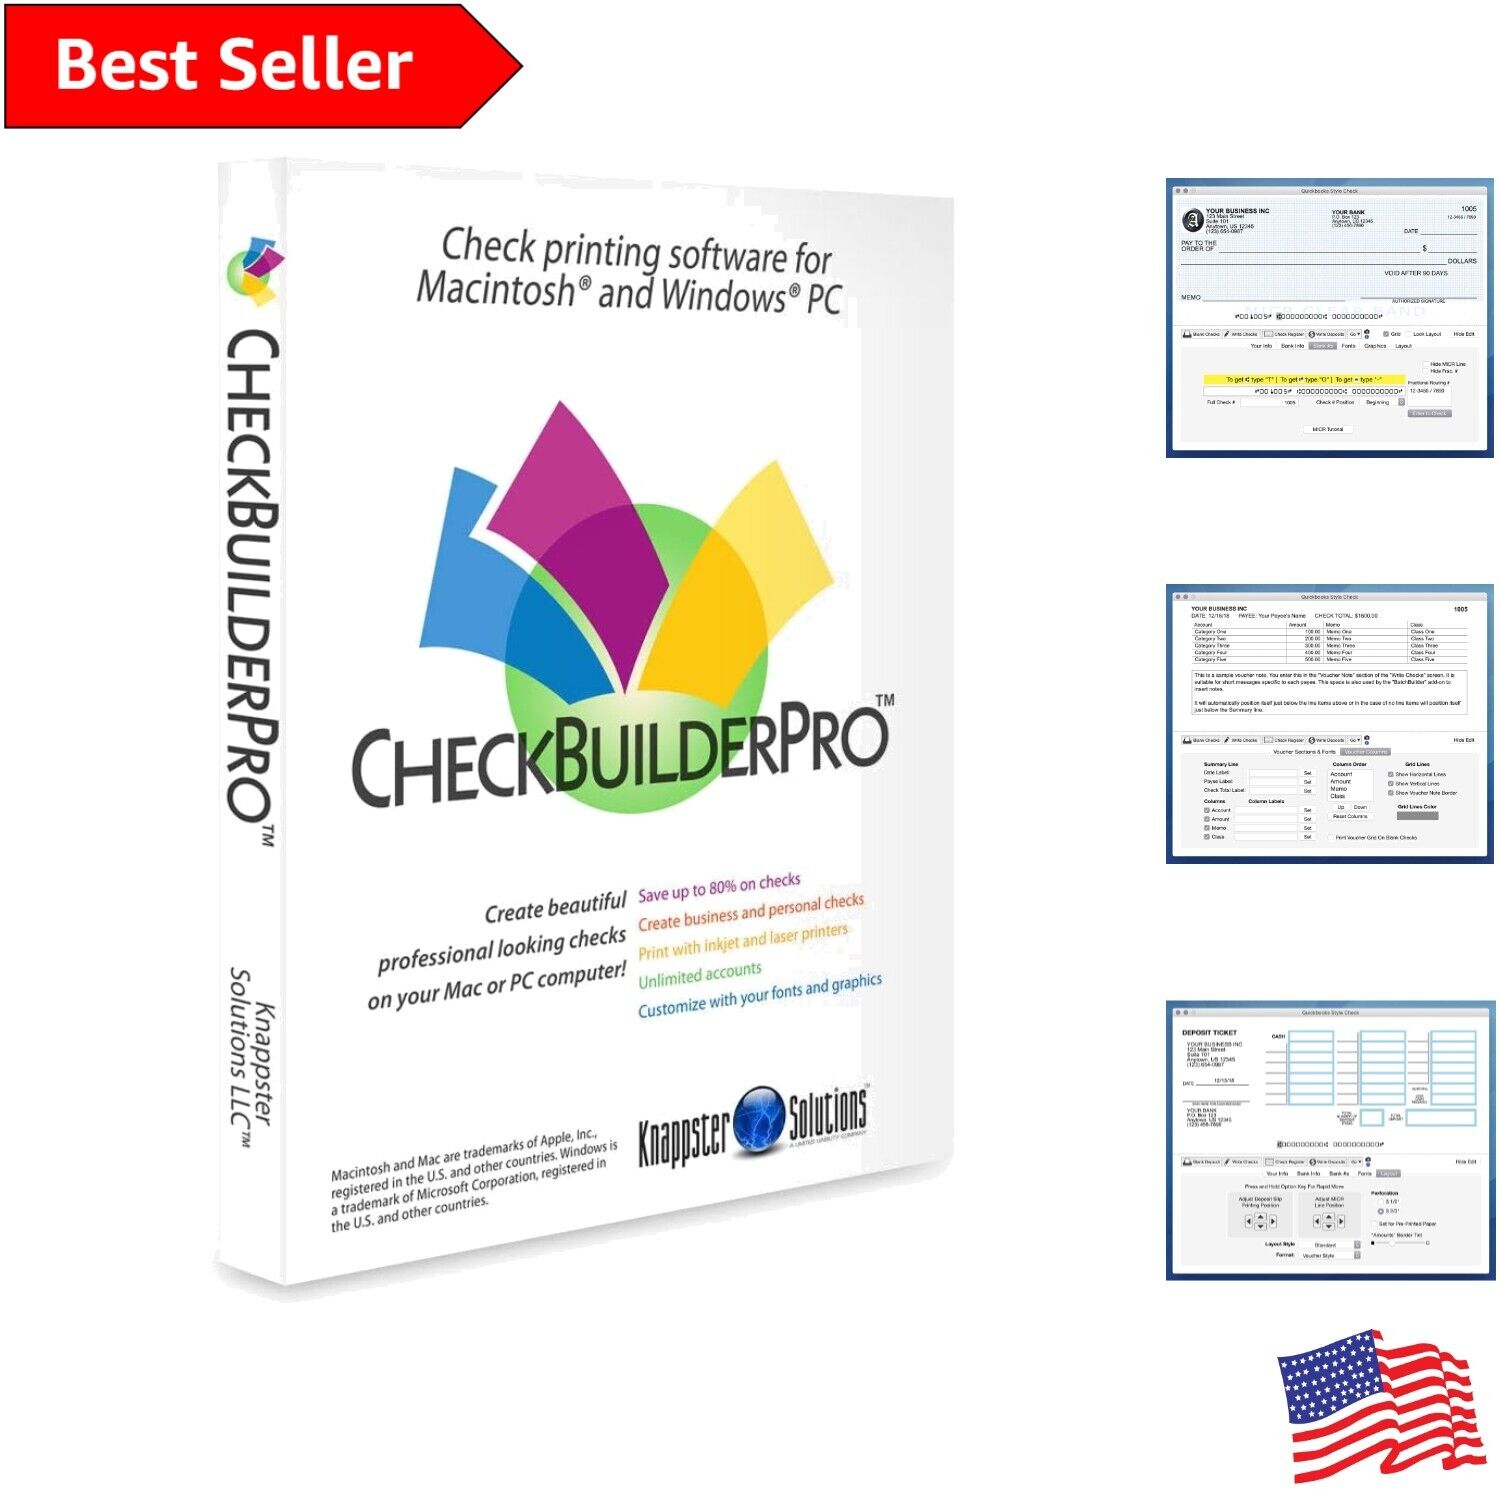 Cost-Effective Check Printing Software for Business & Personal Use - Windows Mac